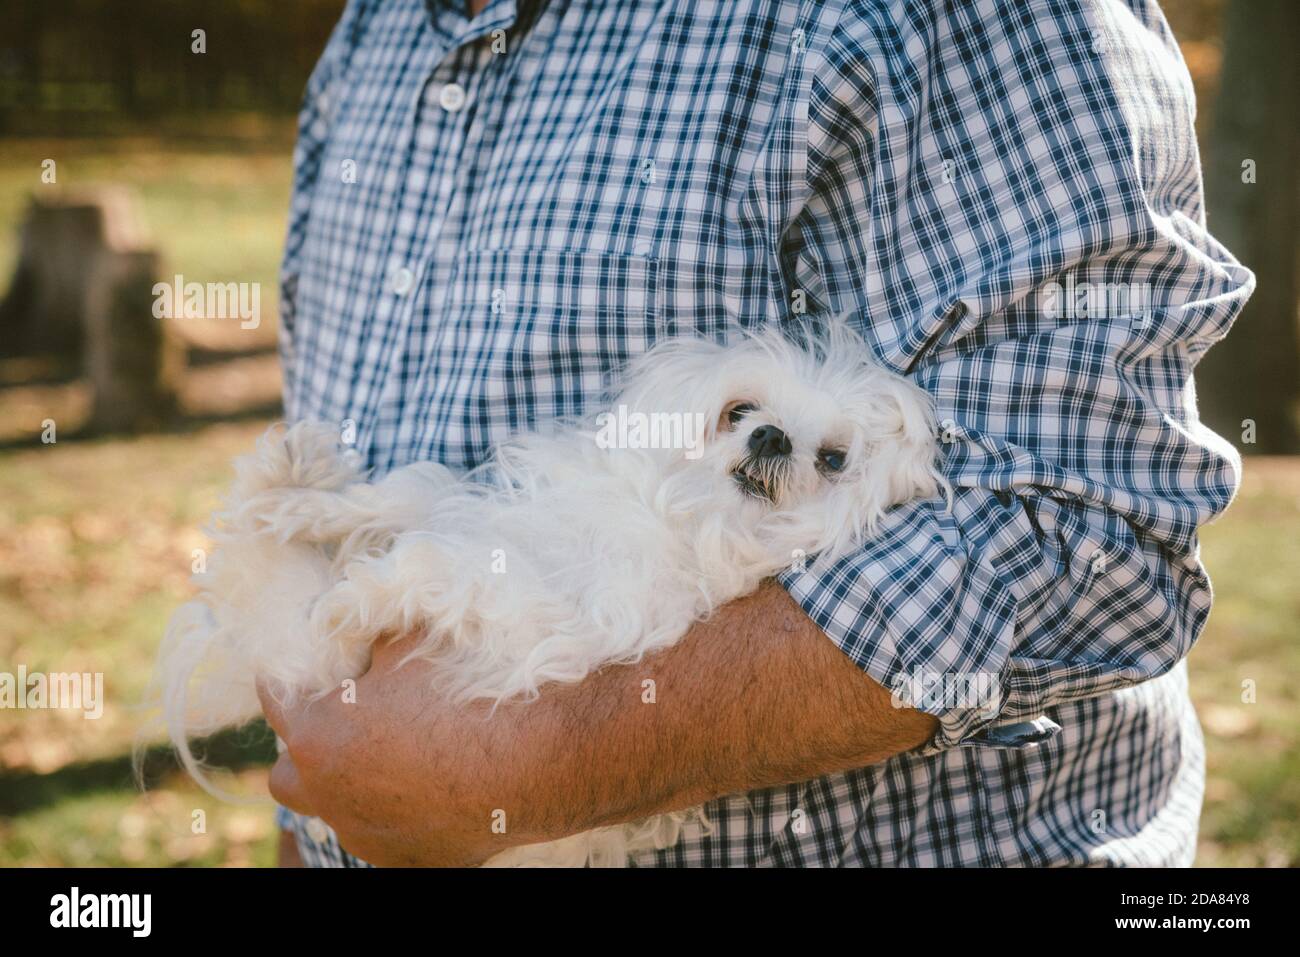 A Maltese dog, in its daddy’s arms. Stock Photo